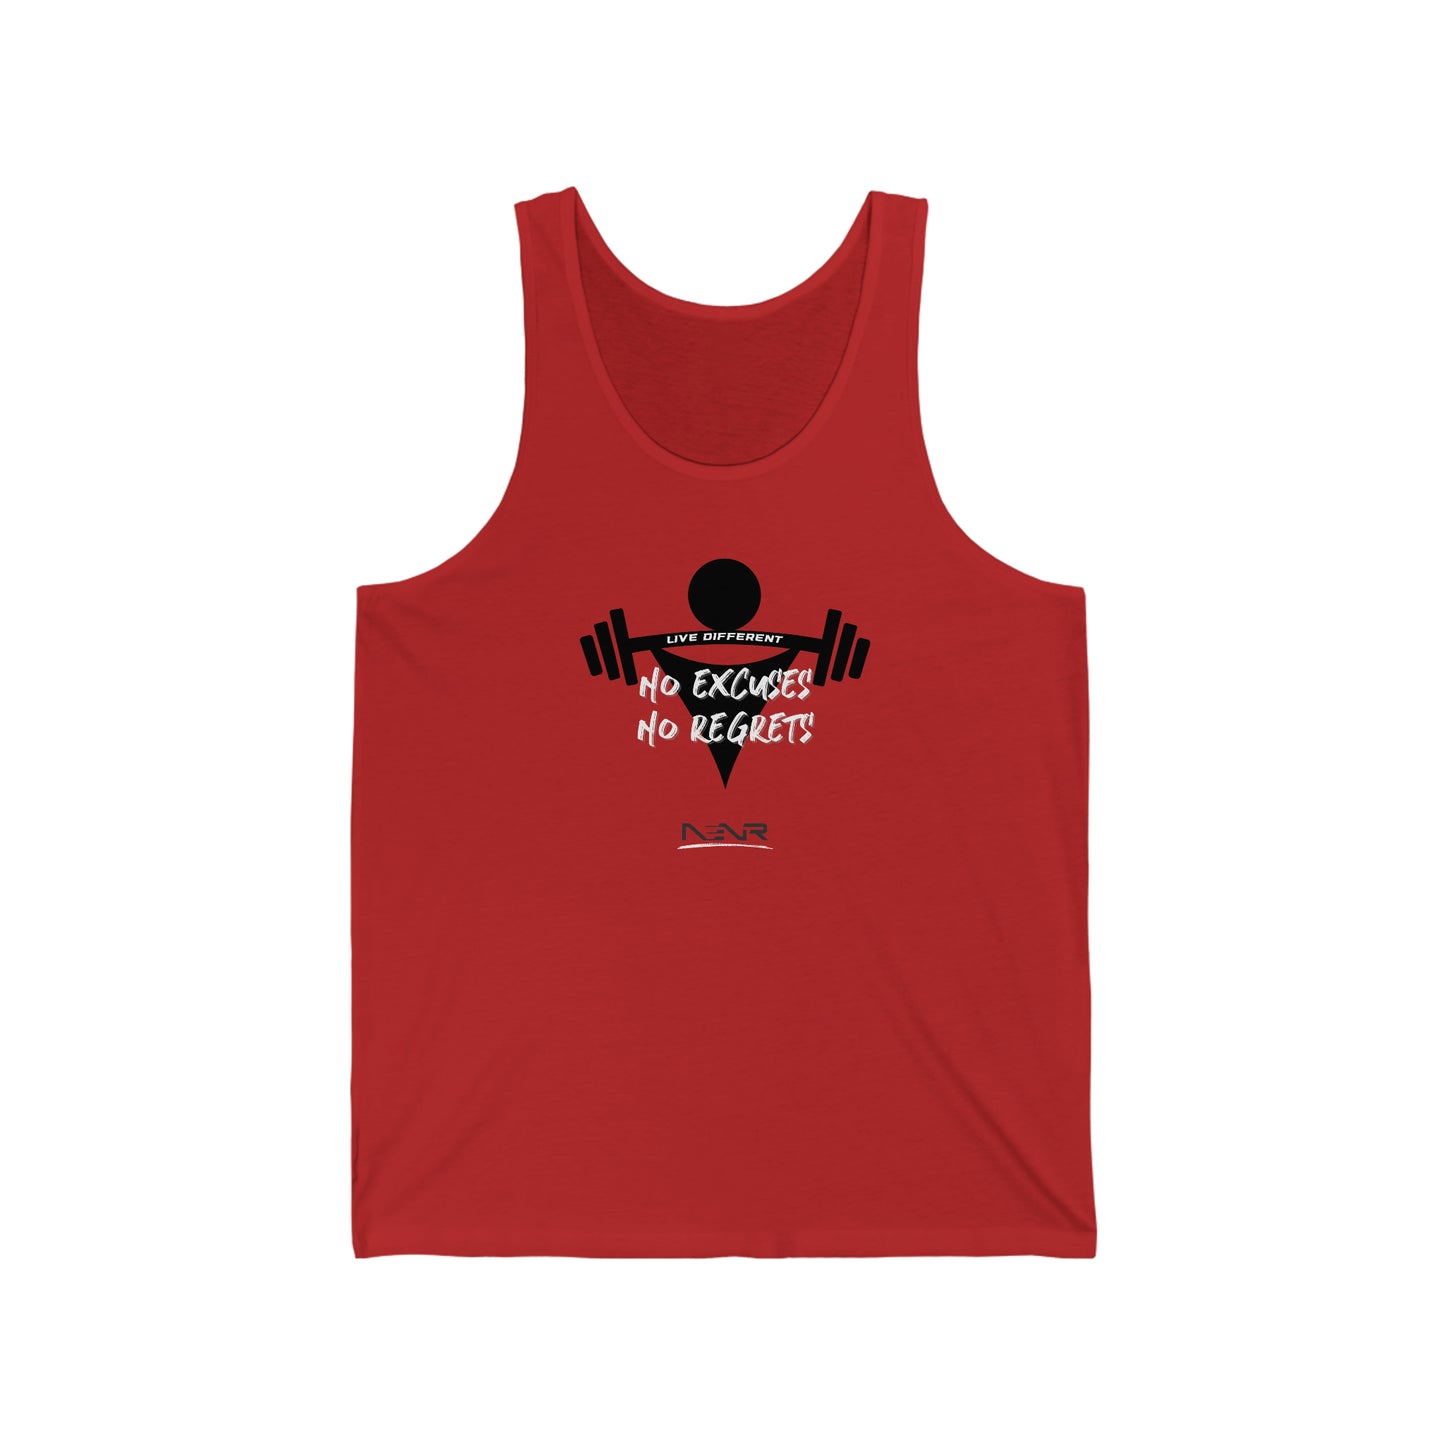 NO EXCUSES NO REGRETS ~ NENR FITNESS WORKOUT GEAR